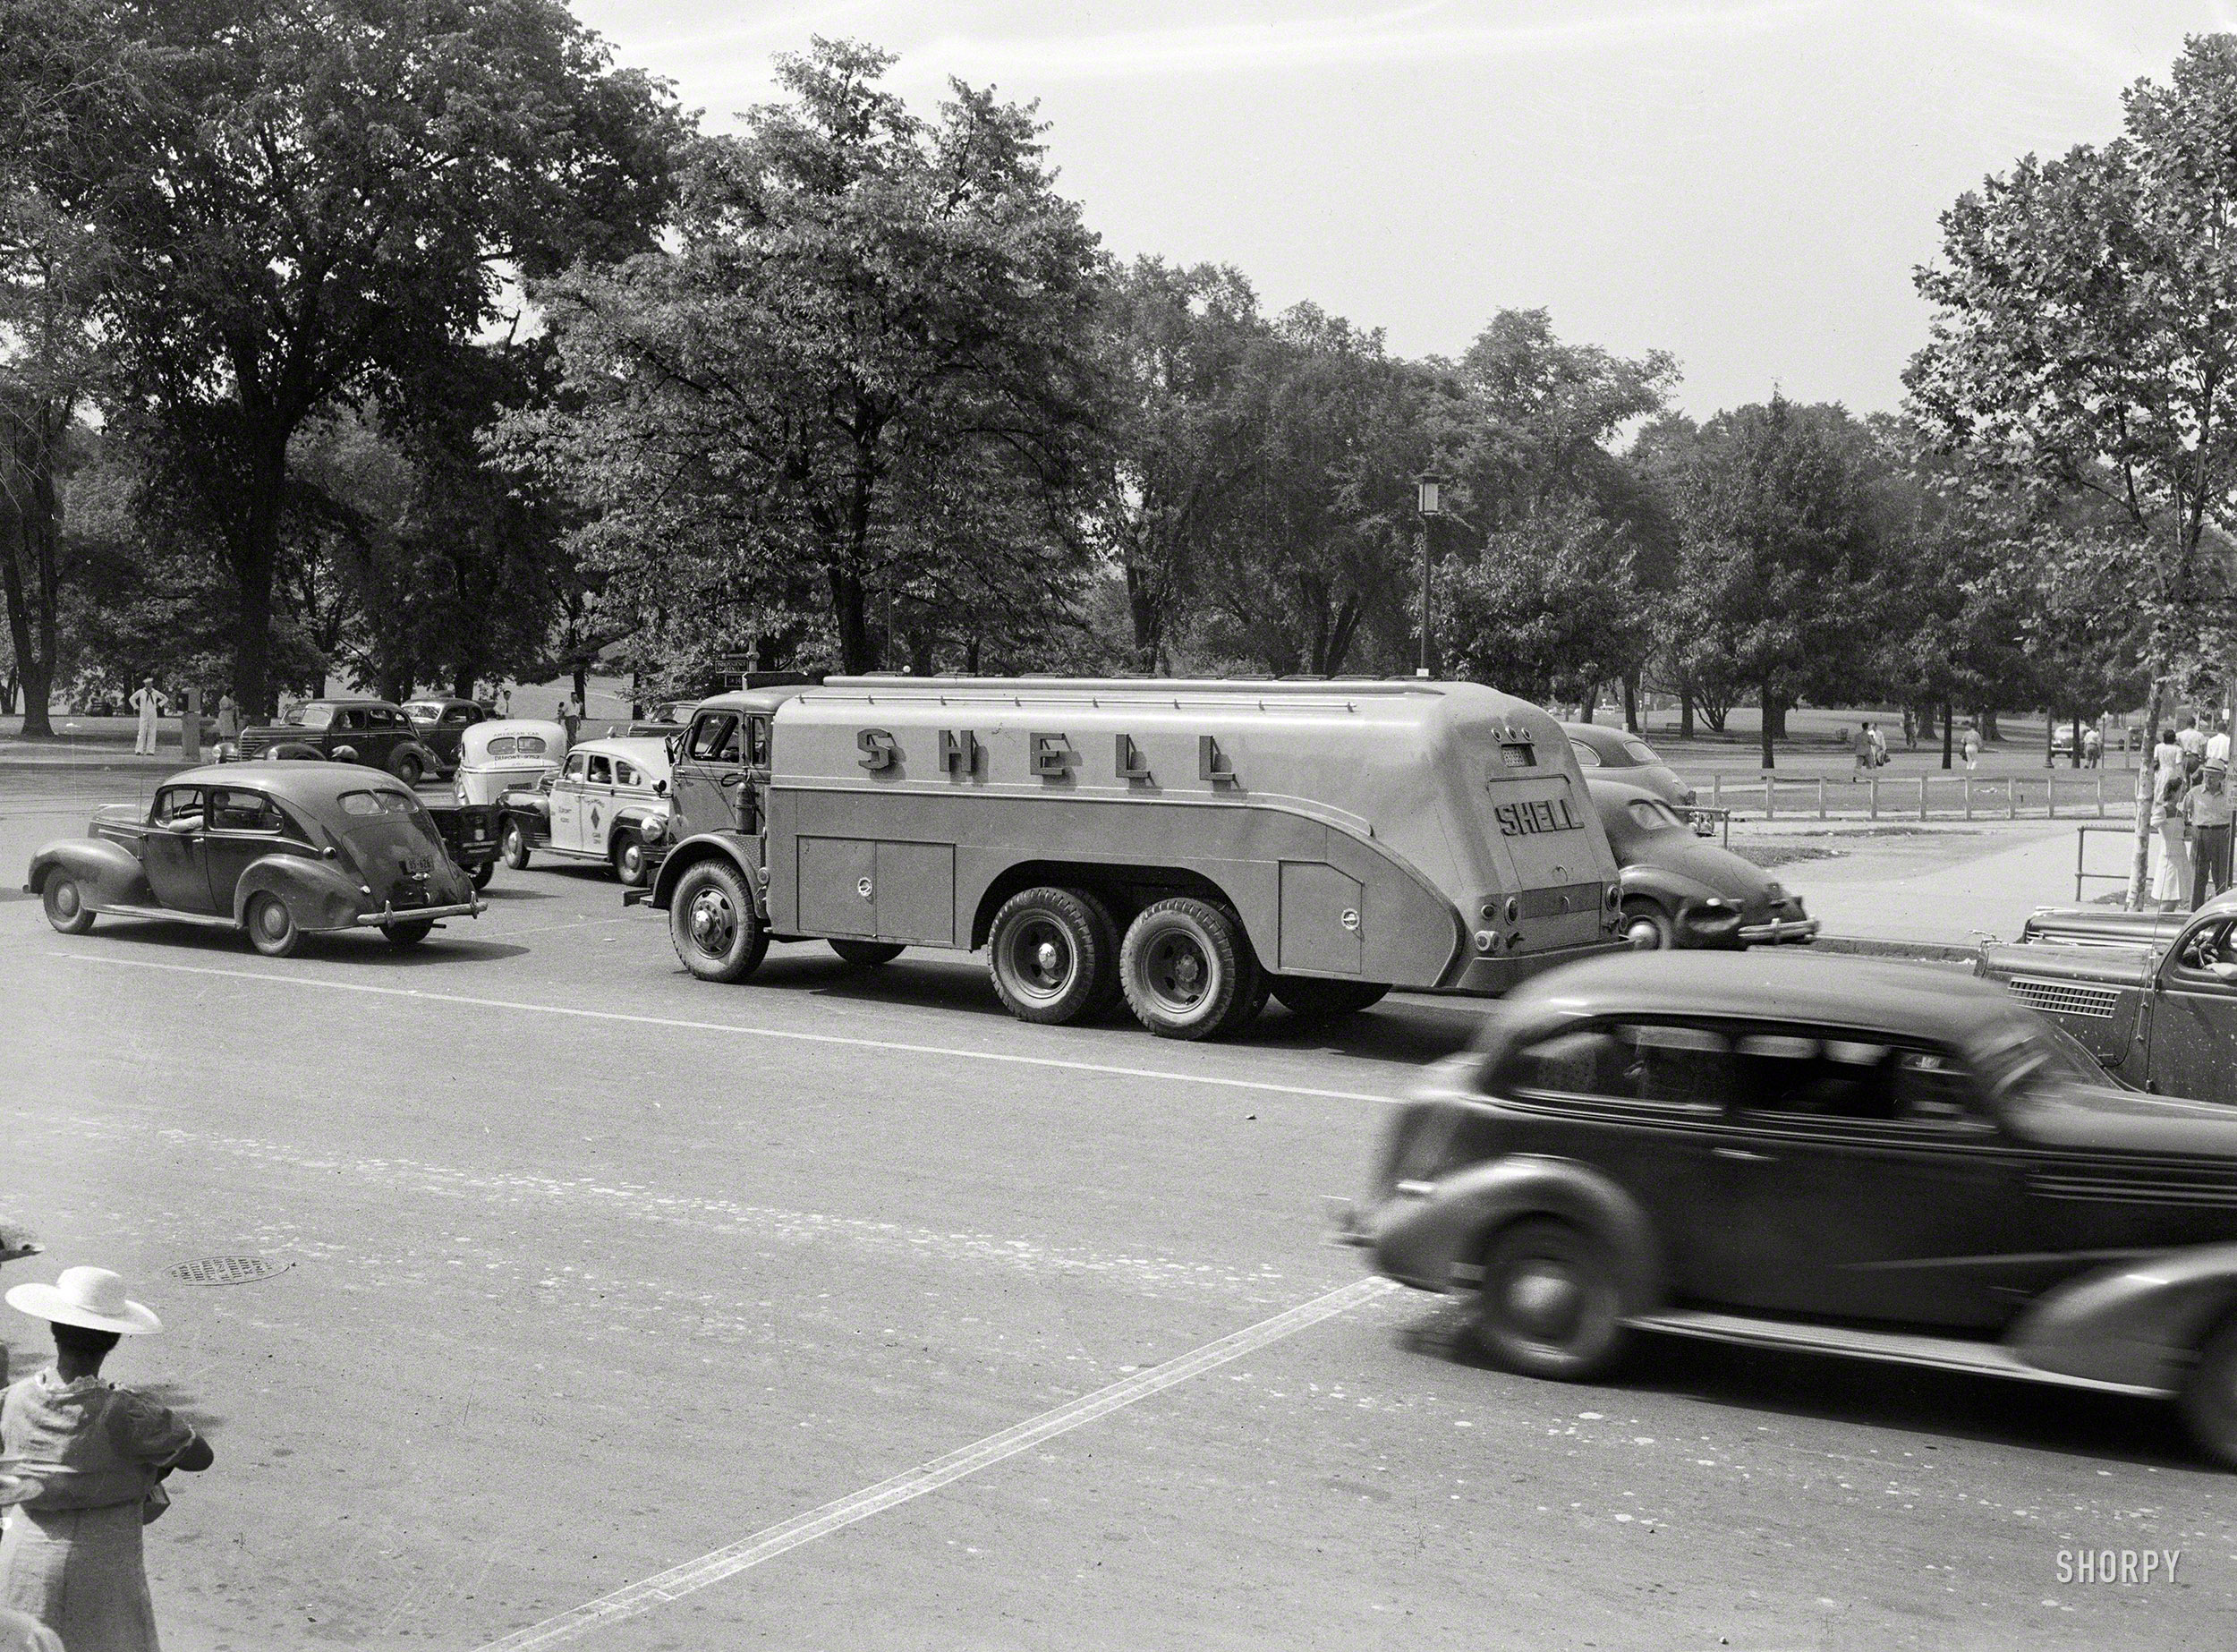 July 1942. Washington, D.C. "Cars and trucks on Independence Avenue S.W." Photo by John Ferrell for the Office of War Information. View full size.